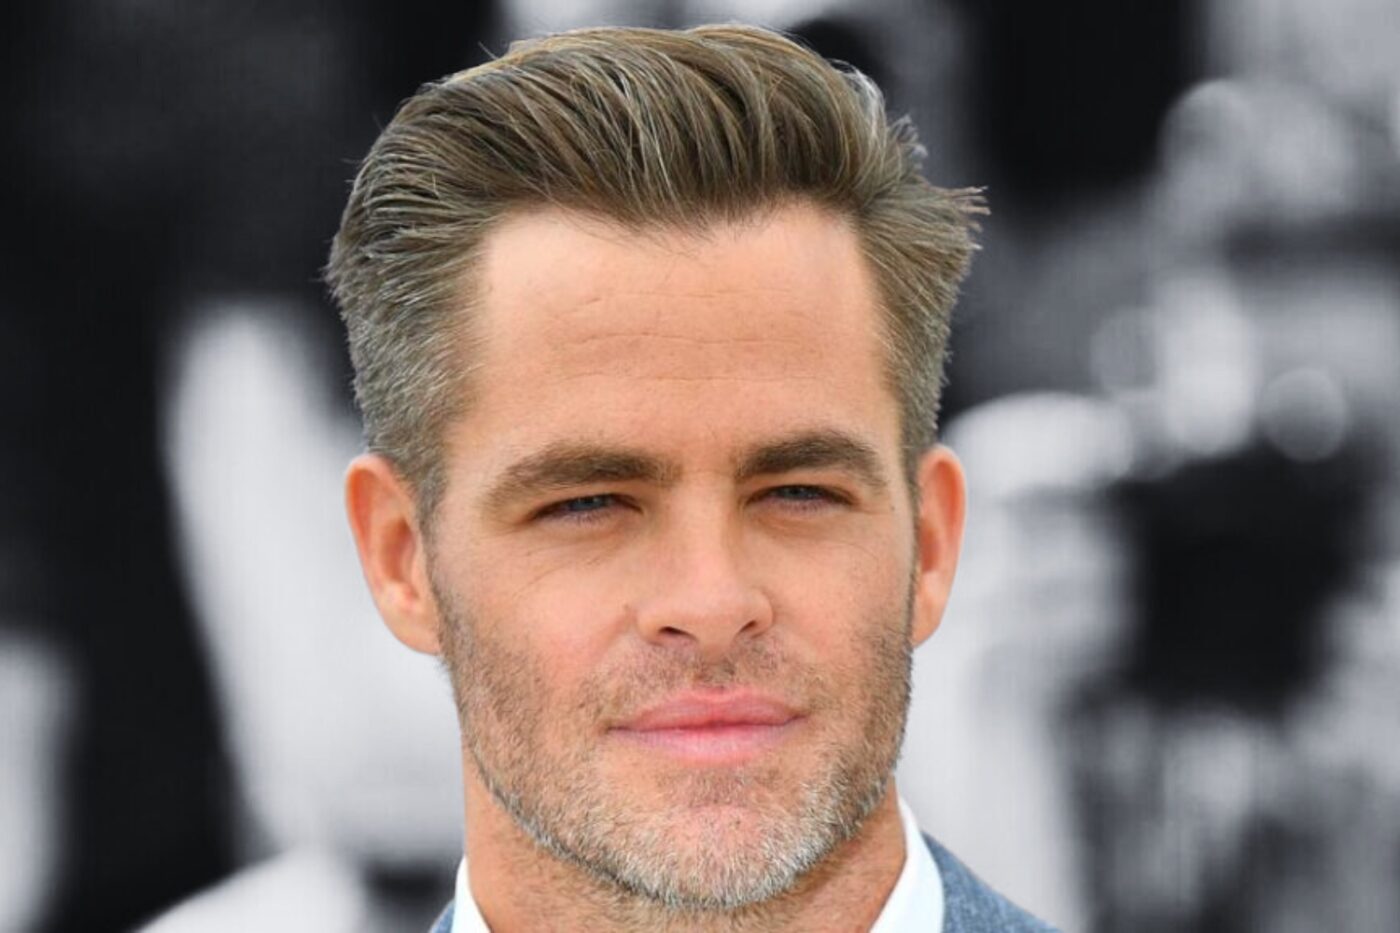 Ac Vlogs - Brush-Up The brush up hairstyle is a trendy, noticeable cut  that's ideal for fashion-forward boys. Similar to the quiff, it's a  messy-looking style that conveys carefreeness. The sides and